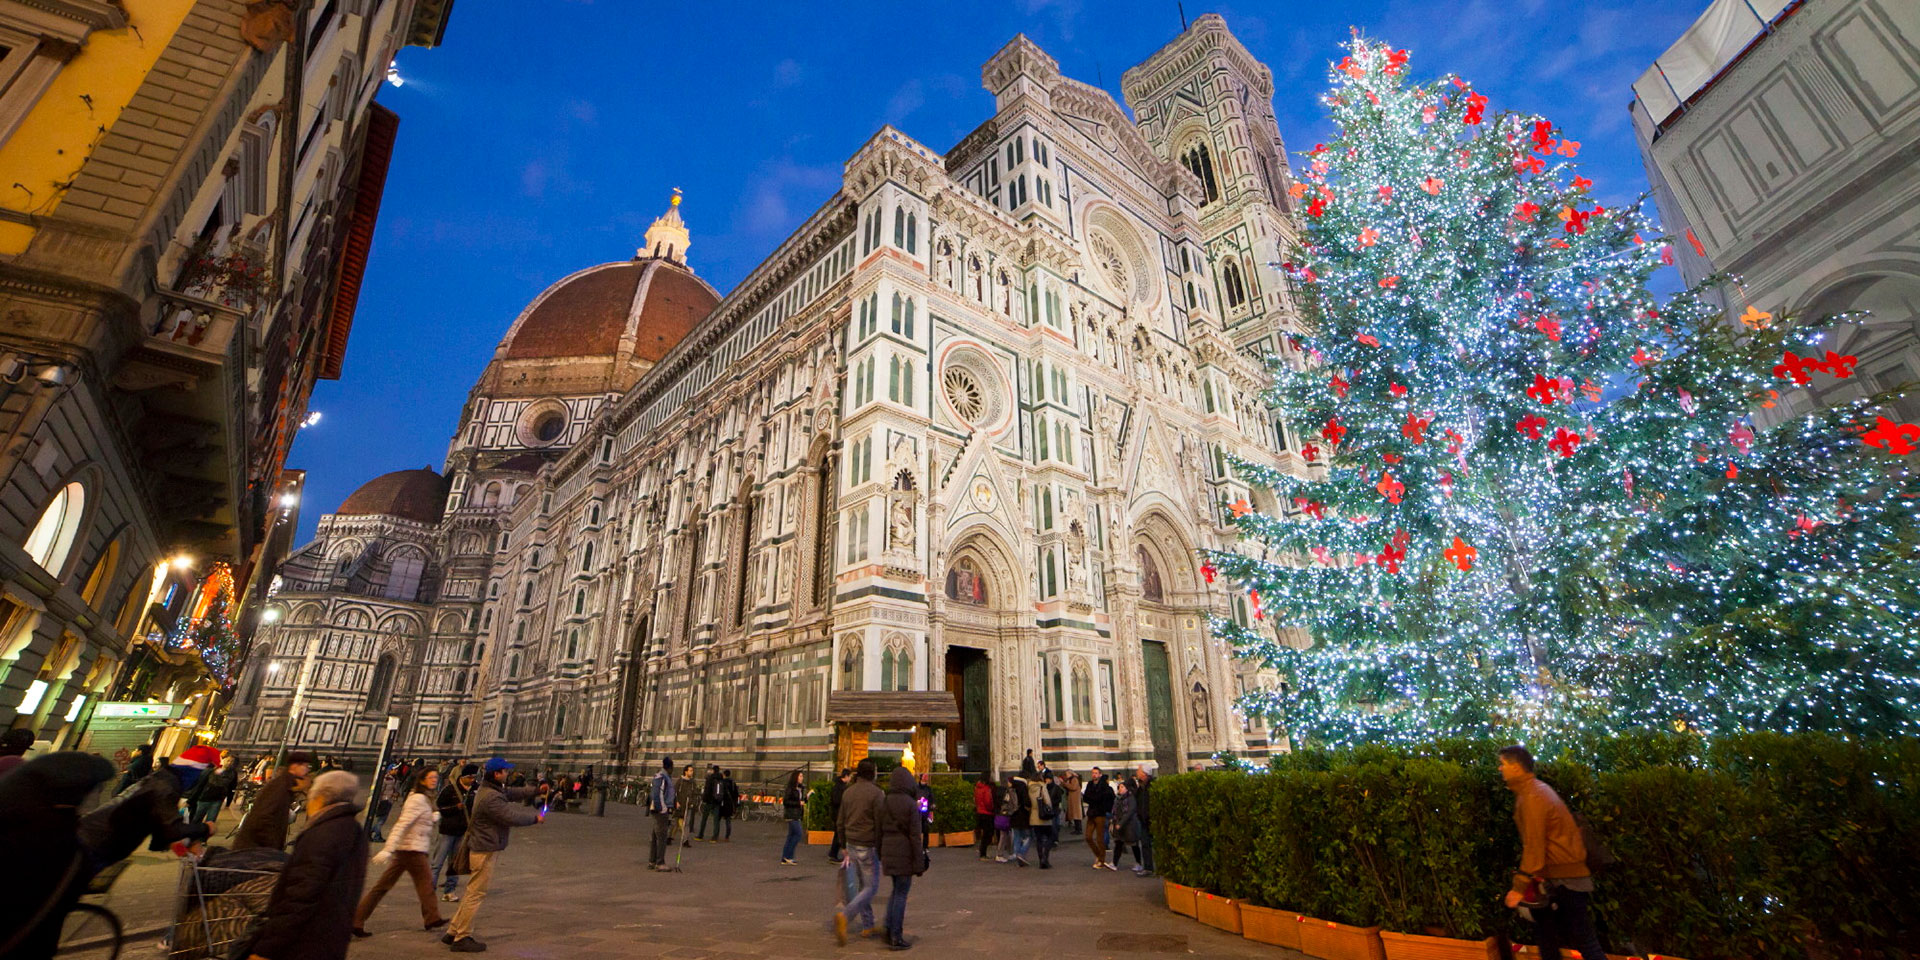 Buon Natale in Florence: Celebrate Christmas in the Cradle of the Renaissance